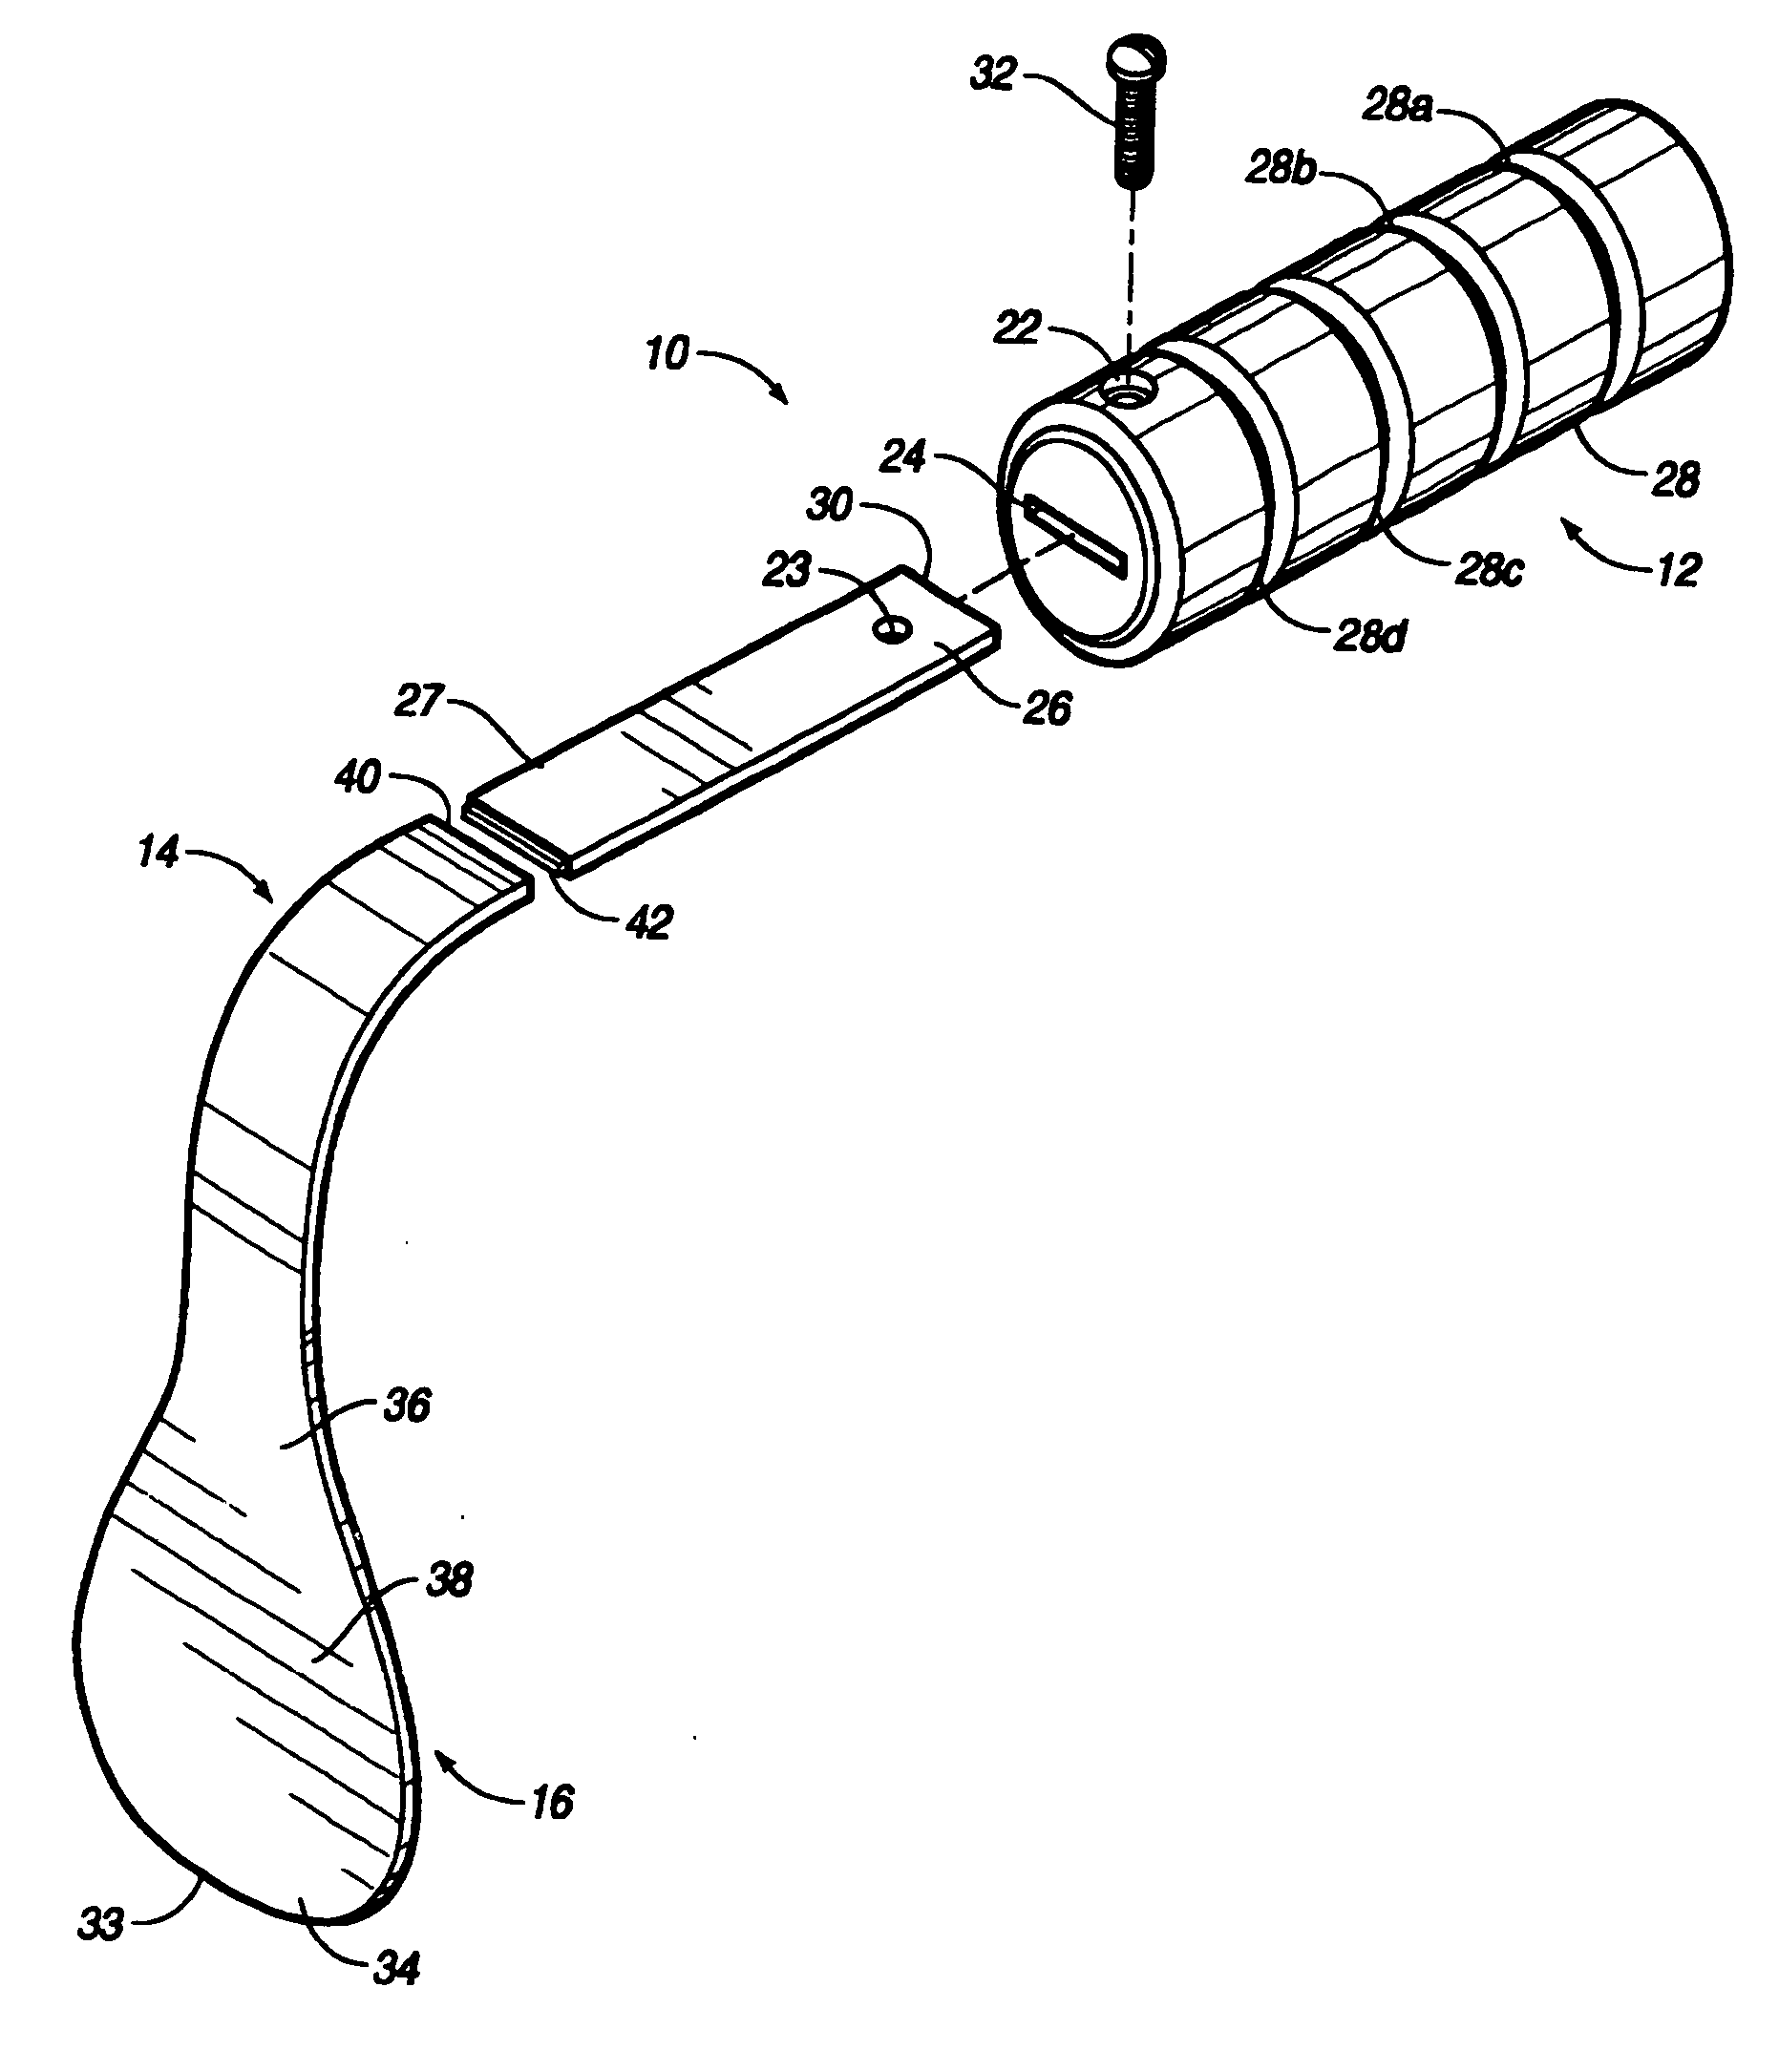 Superglottic and peri-laryngeal apparatus having video components for structural visualization and for placement of supraglottic, intraglottic, tracheal and esophageal conduits